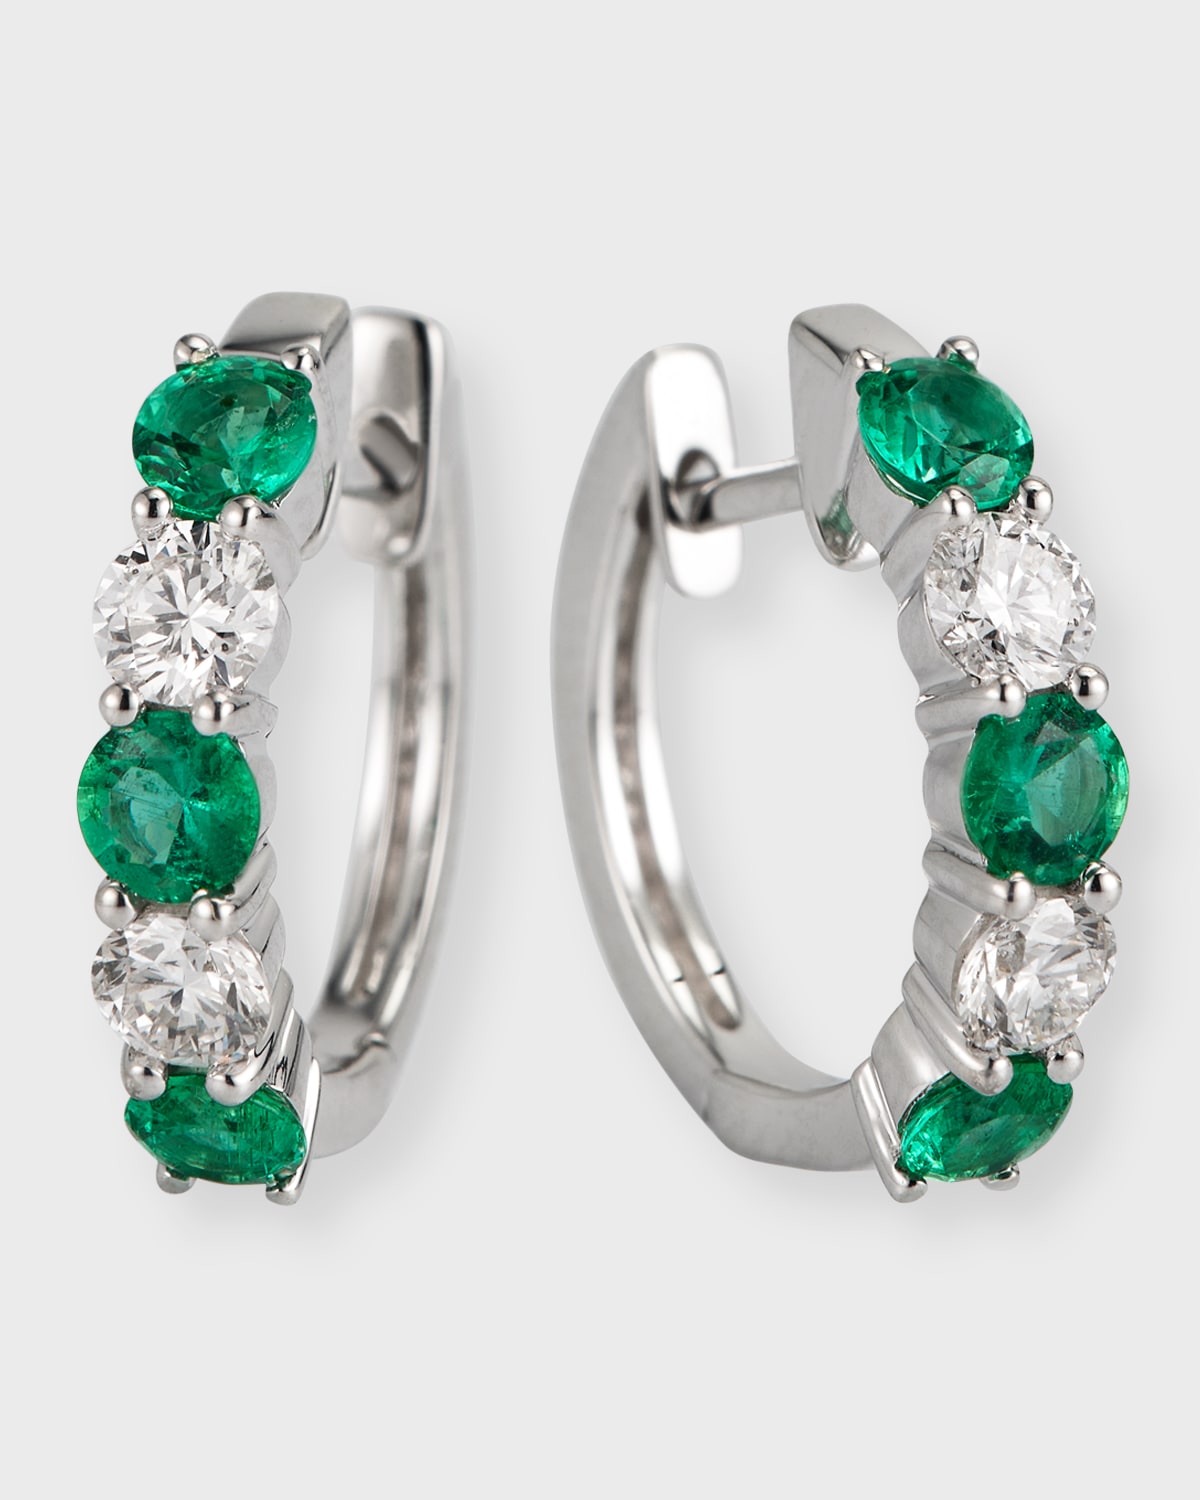 David Kord 18k White Gold Earrings With 3.3mm Alternating Diamonds And Emeralds In Metallic